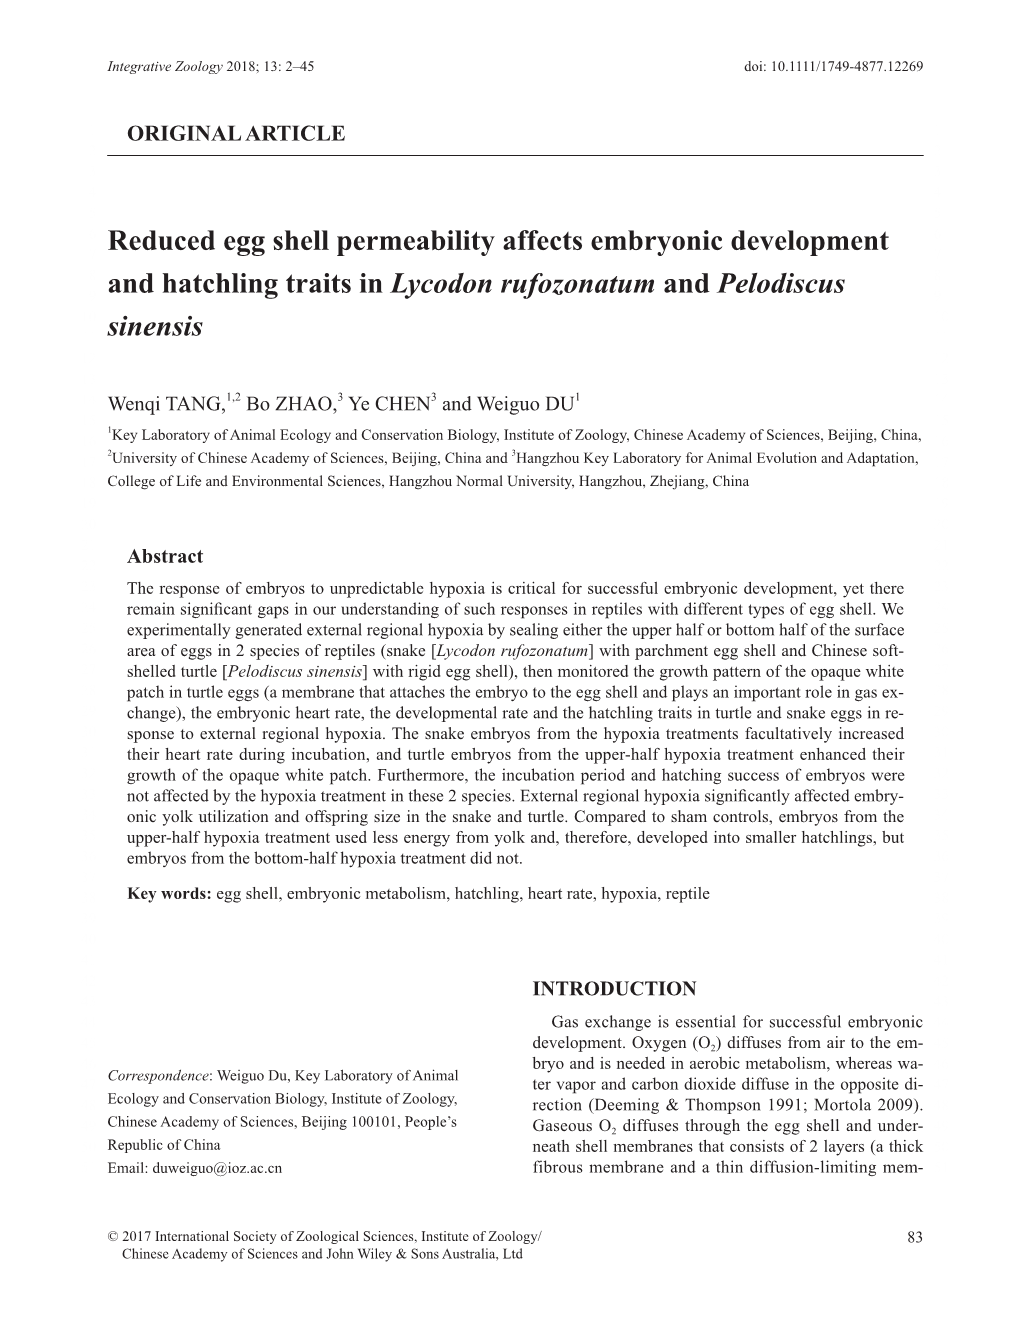 Reduced Egg Shell Permeability Affects Embryonic Development And